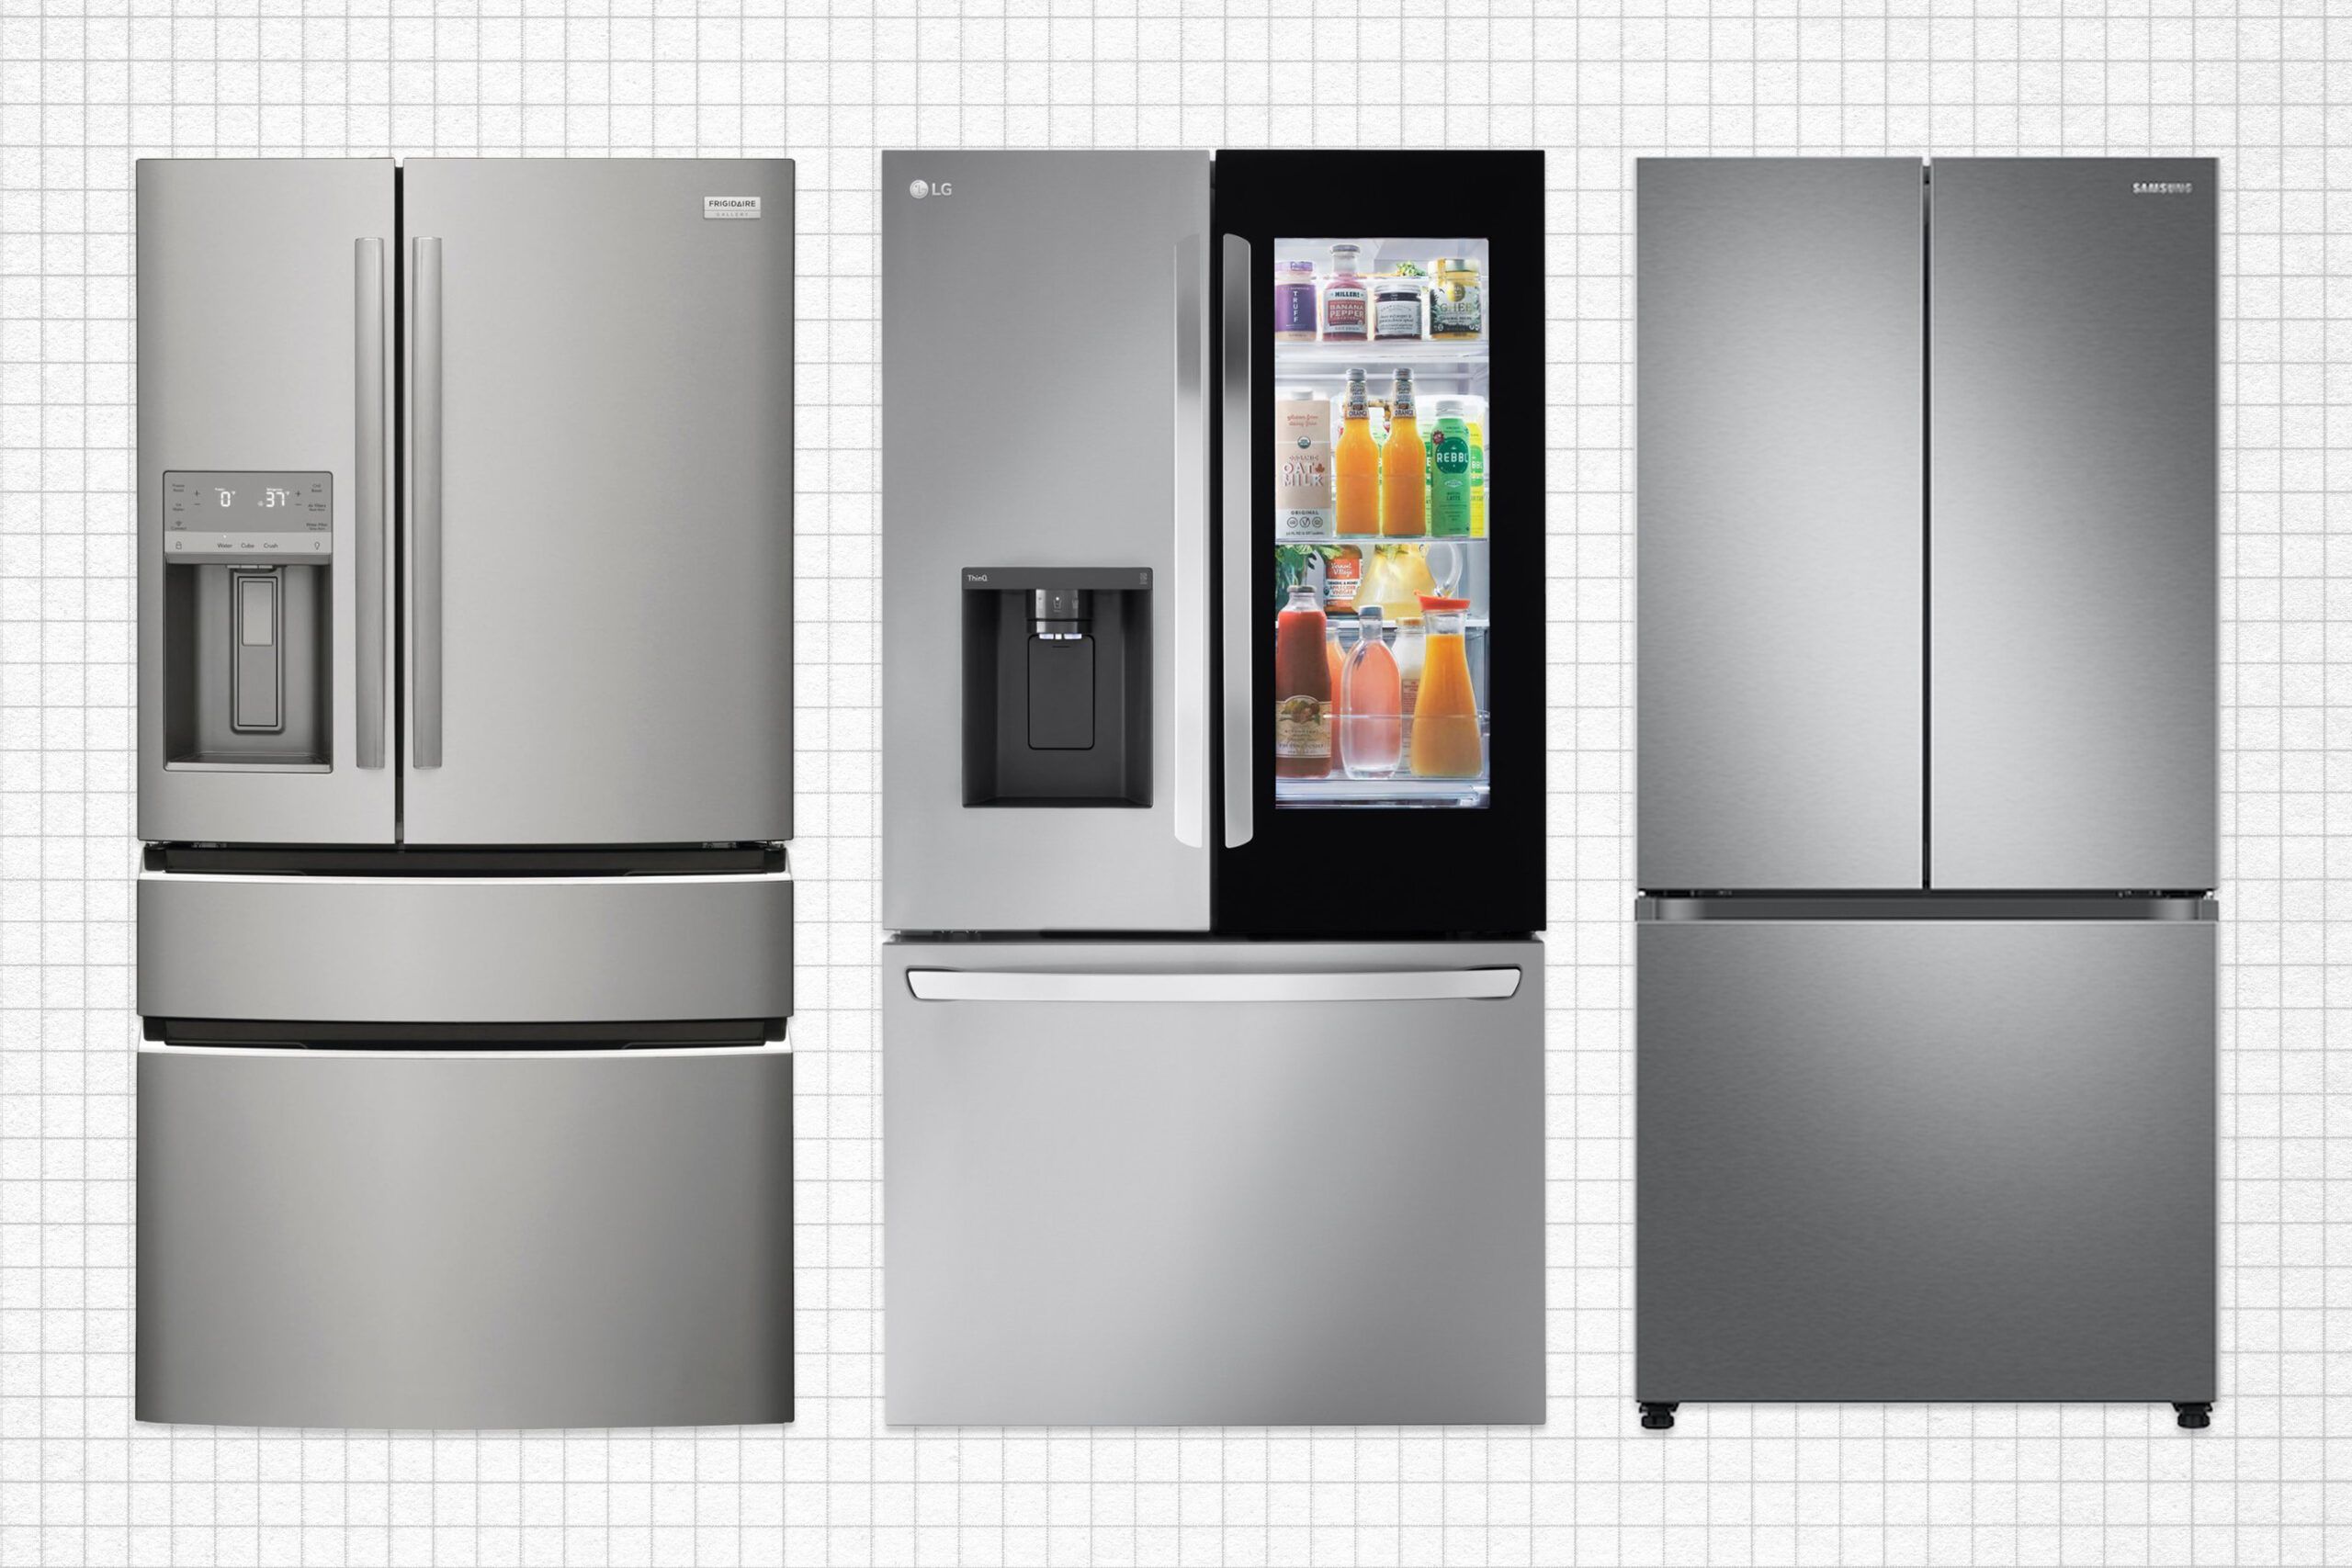 Frigidaire GRMC2273BF French Door Refrigerator, LG LRFOC2606S French Door Refrigerator, and Samsung RF25C5151SR French Door Refrigerator isolated on a white grid paper background.